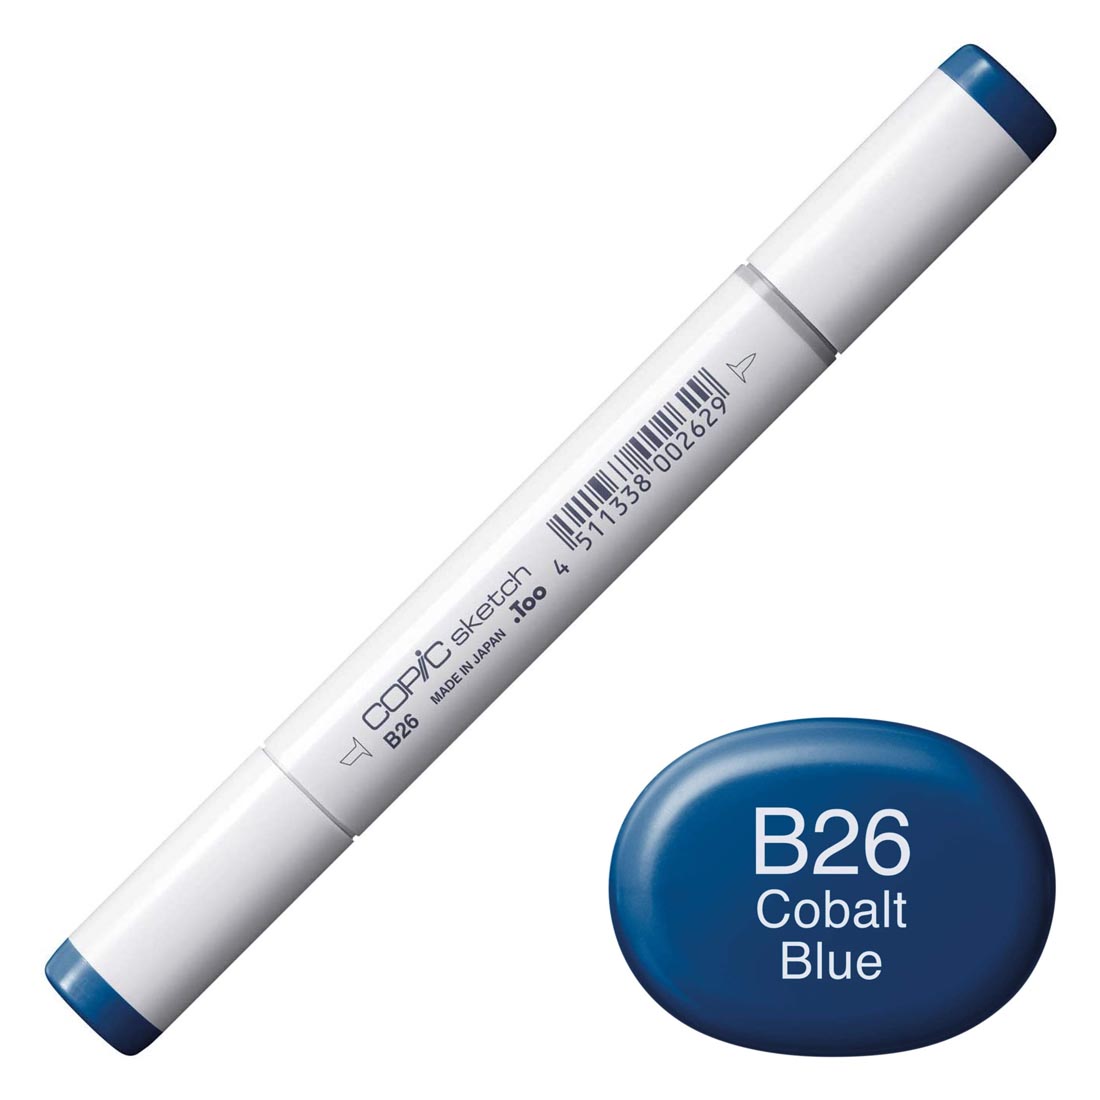 COPIC Sketch Marker with a color swatch and text of B26 Cobalt Blue